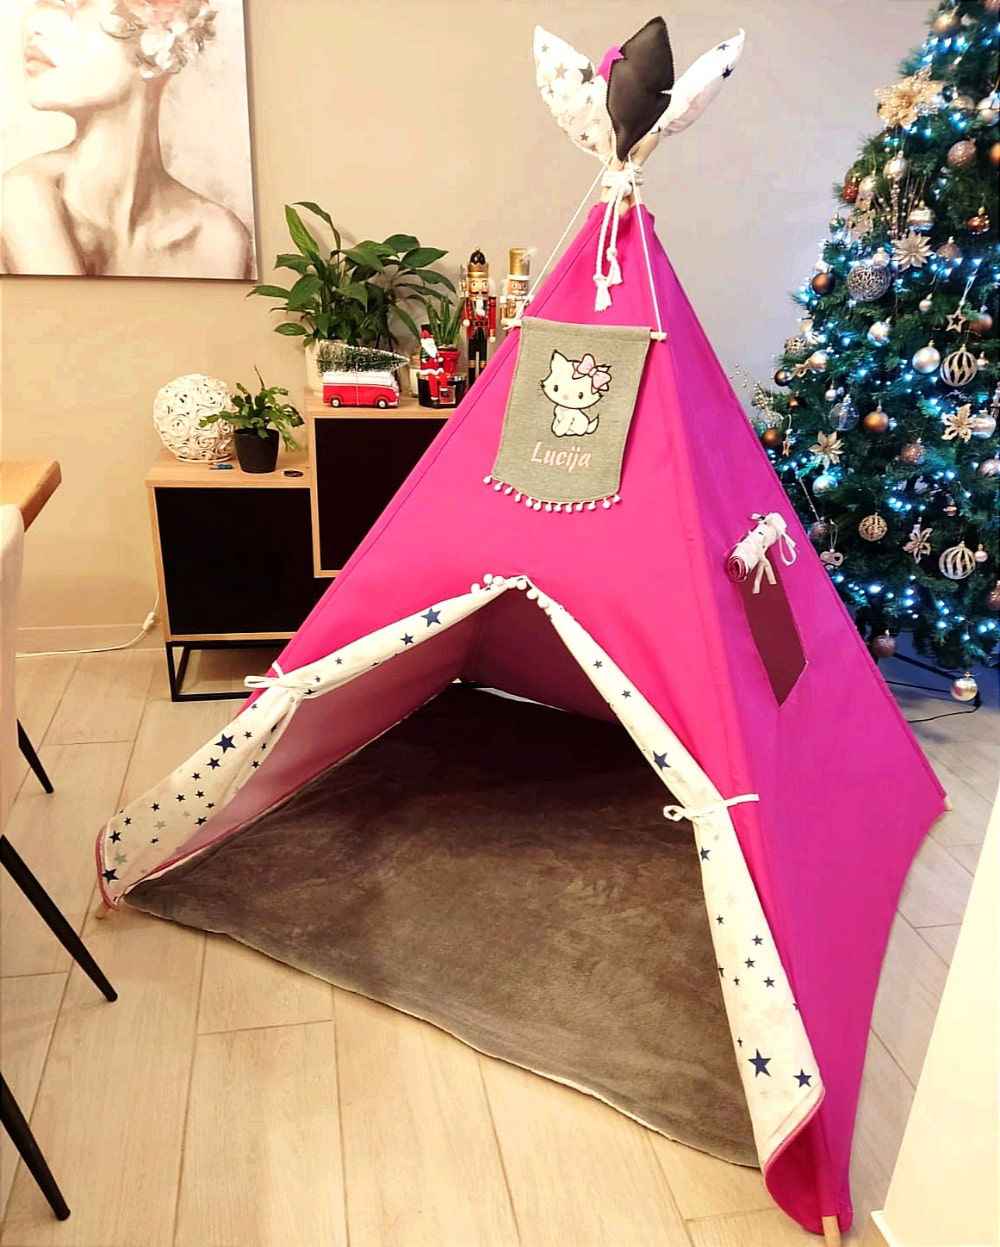 Personalized teepee tent for kids